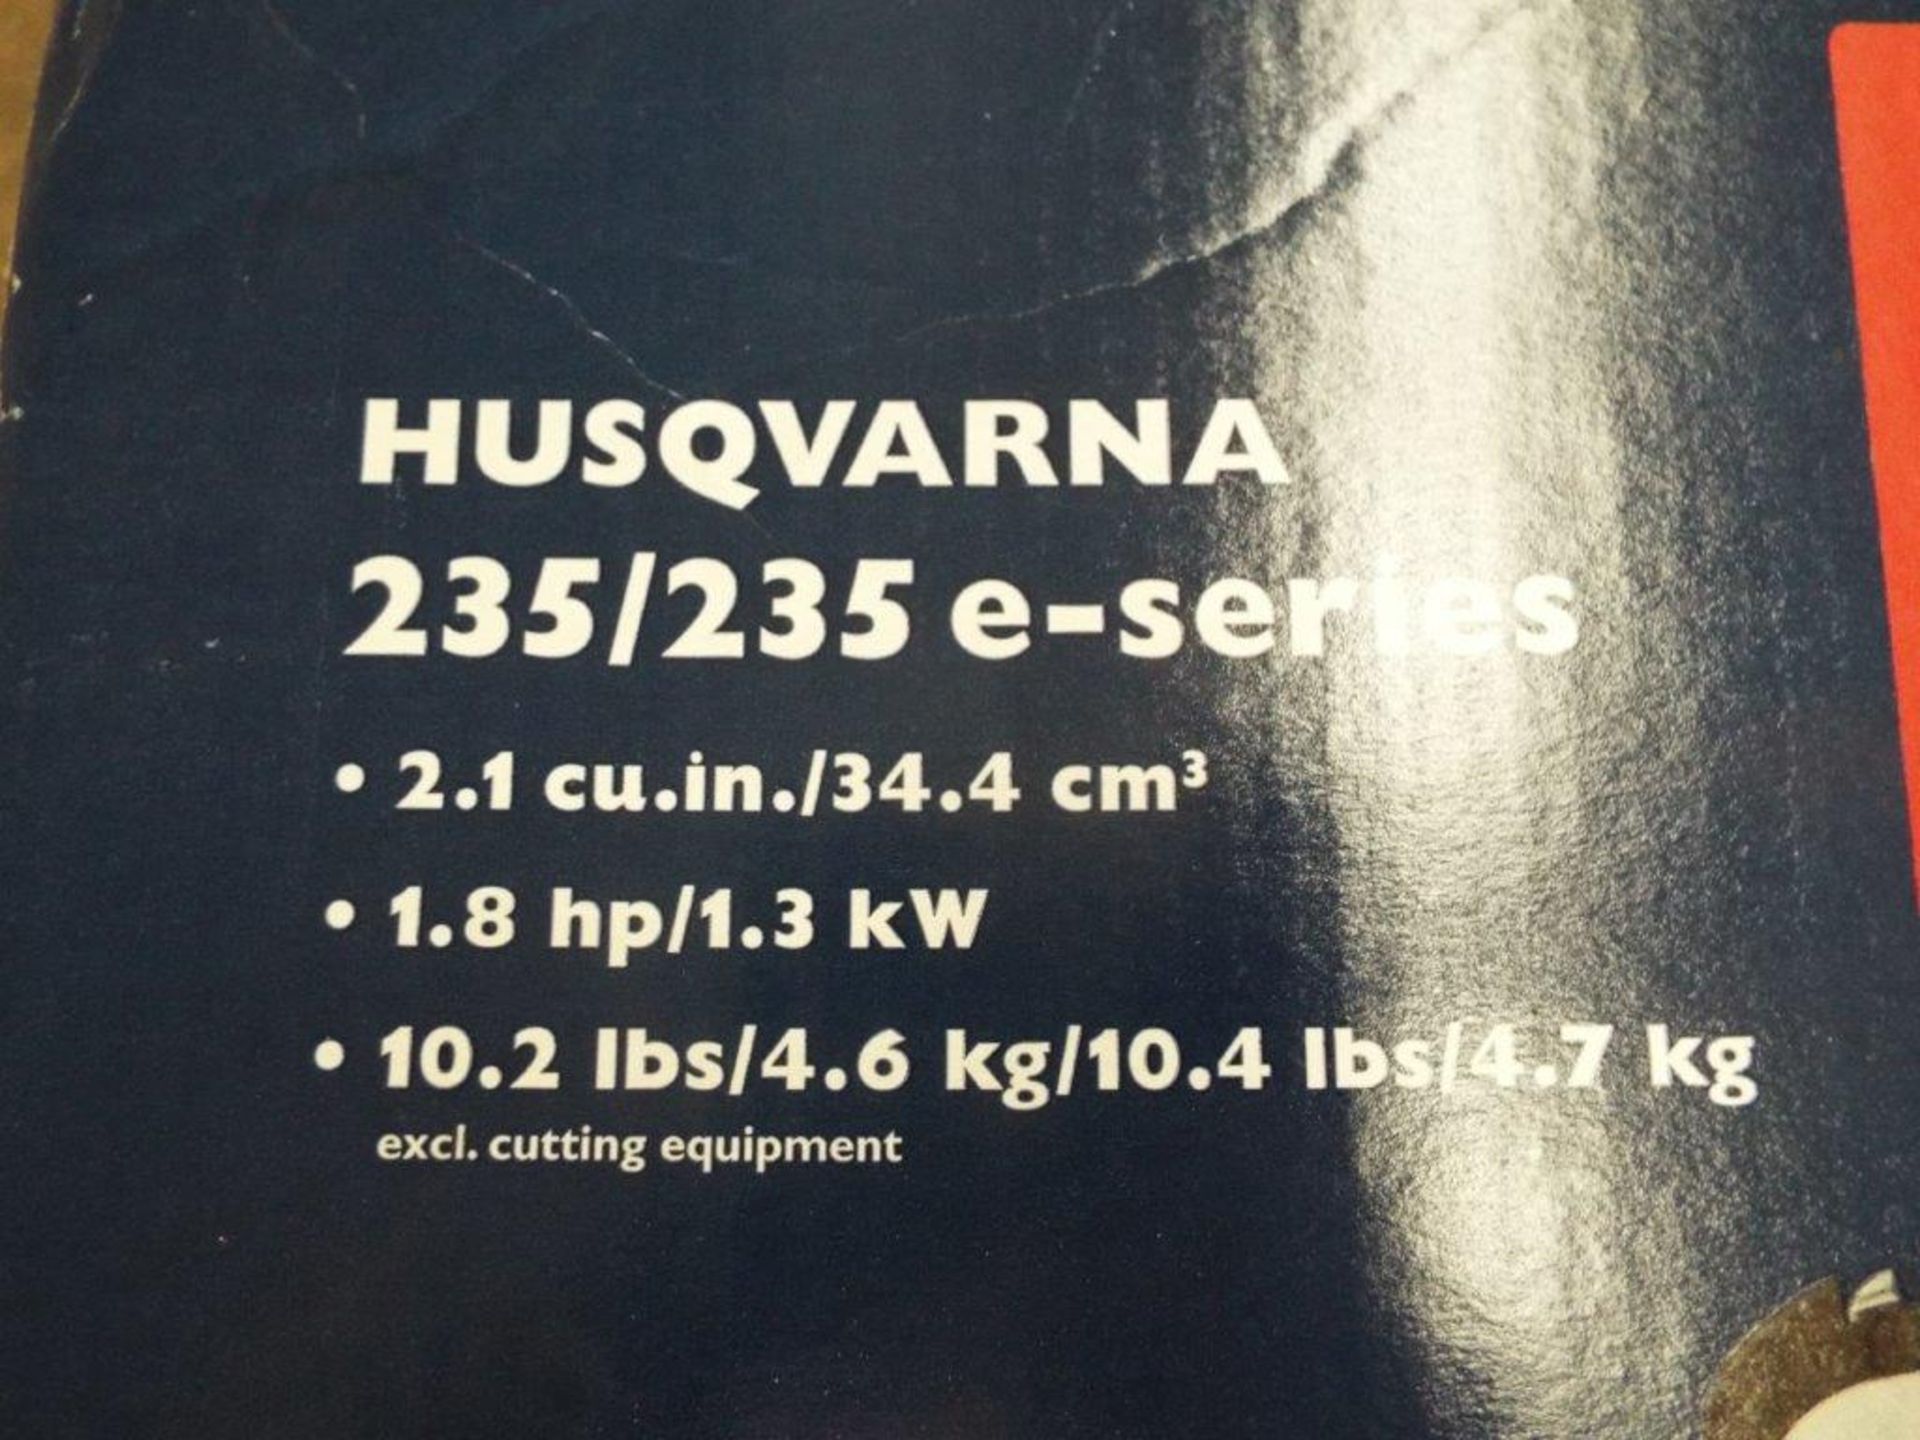 New Unused Husqvarna 240 E-Series Chainsaw with 16" Blade - Image 9 of 9